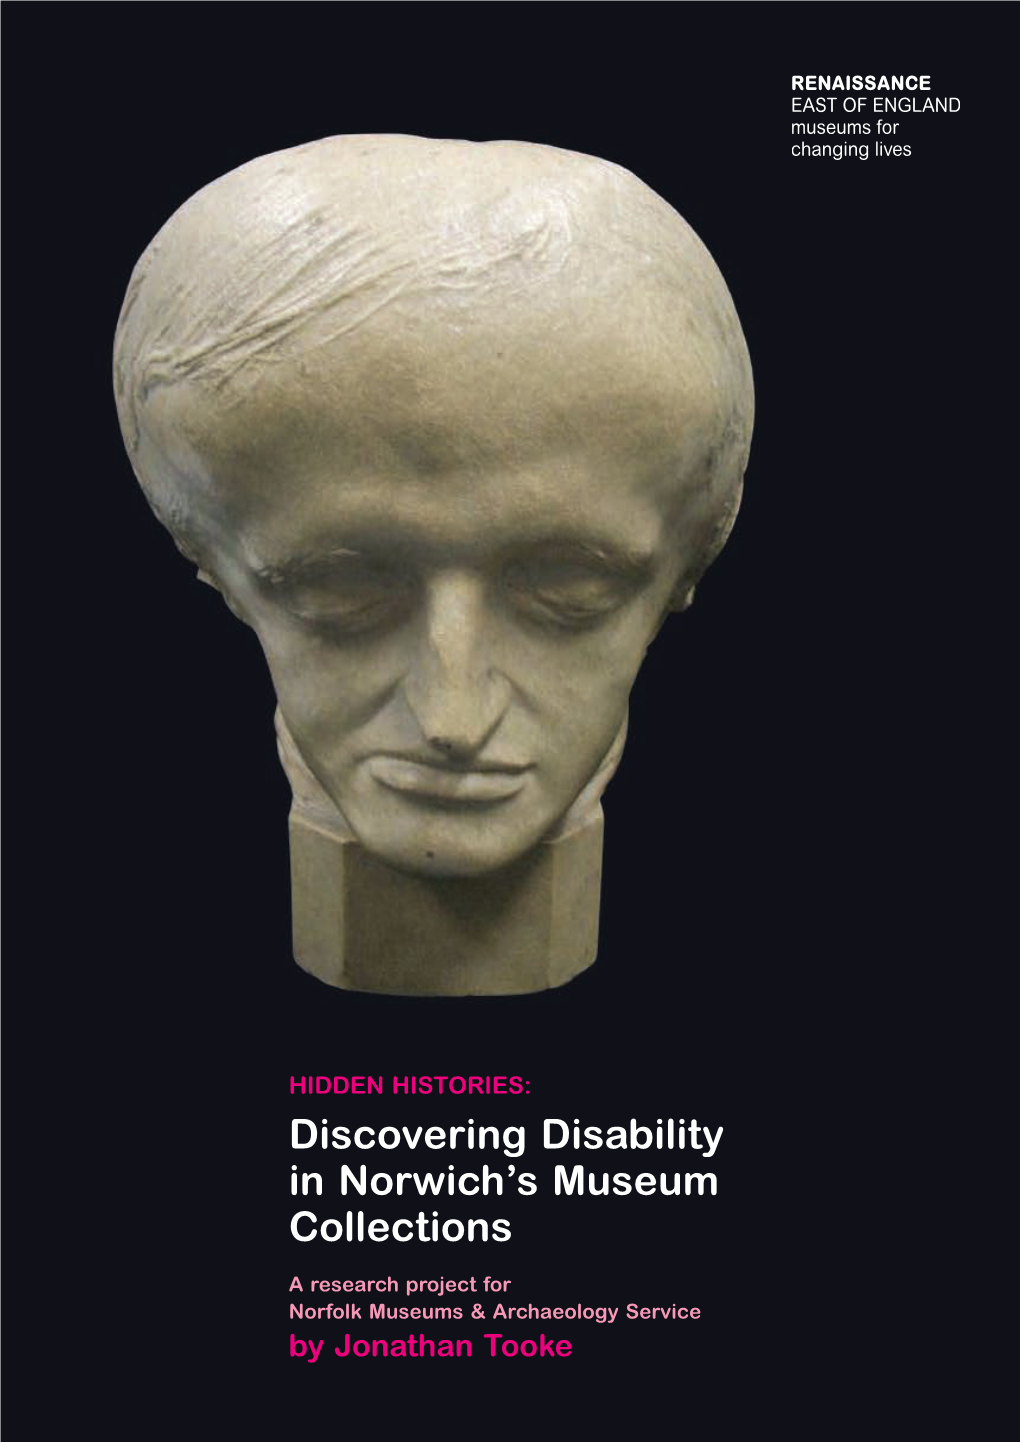 Discovering Disability in Norwich's Museum Collections